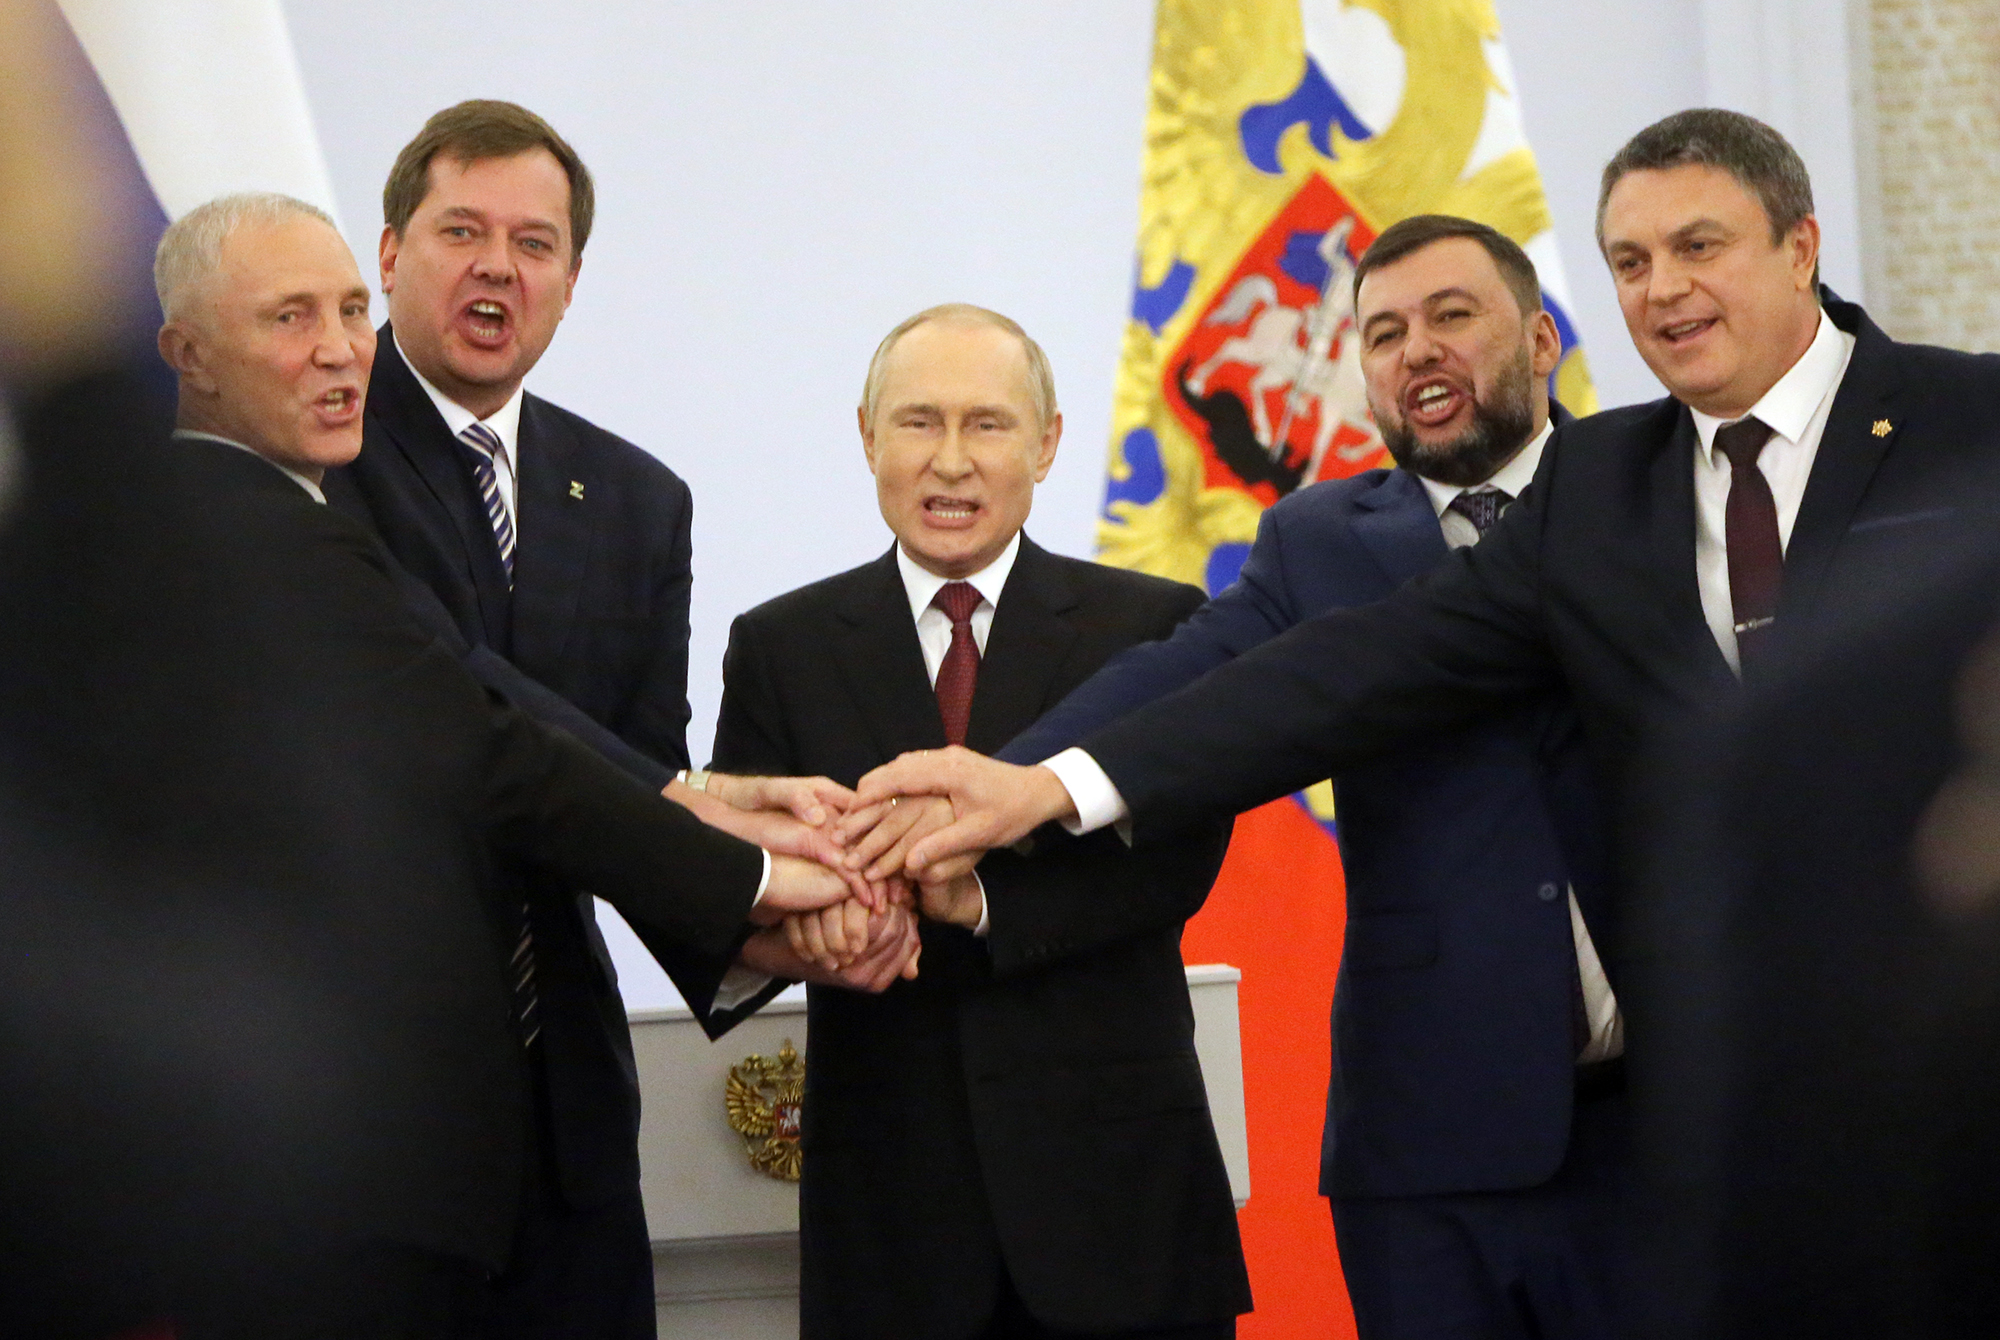 Russian President Vladimir Putin, center, with Ukrainian separatist regional leaders Vladimir Saldo, left, Yevgeniy Balitsky, second left, Leonid Pasechnik, right and Denis Pushilin, second right, seen during the annexation ceremony of four Ukrainian regions at the Grand Kremlin Palace, September 30, in Moscow, Russia. 